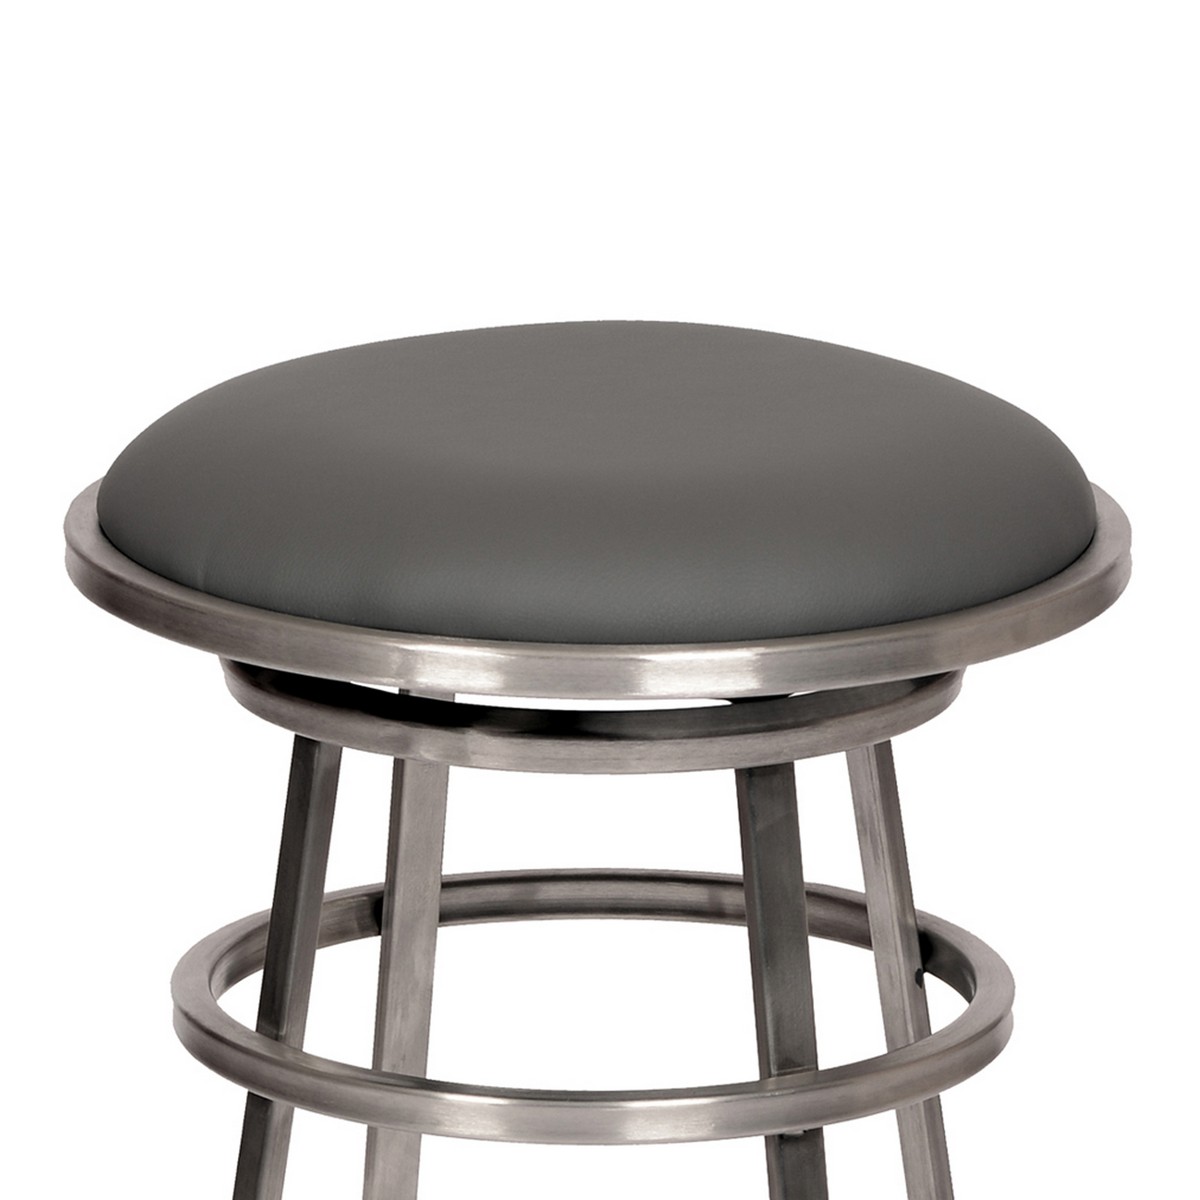 Armen Living Ringo 26-inch Backless Brushed Stainless Steel Barstool in Gray Leatherette